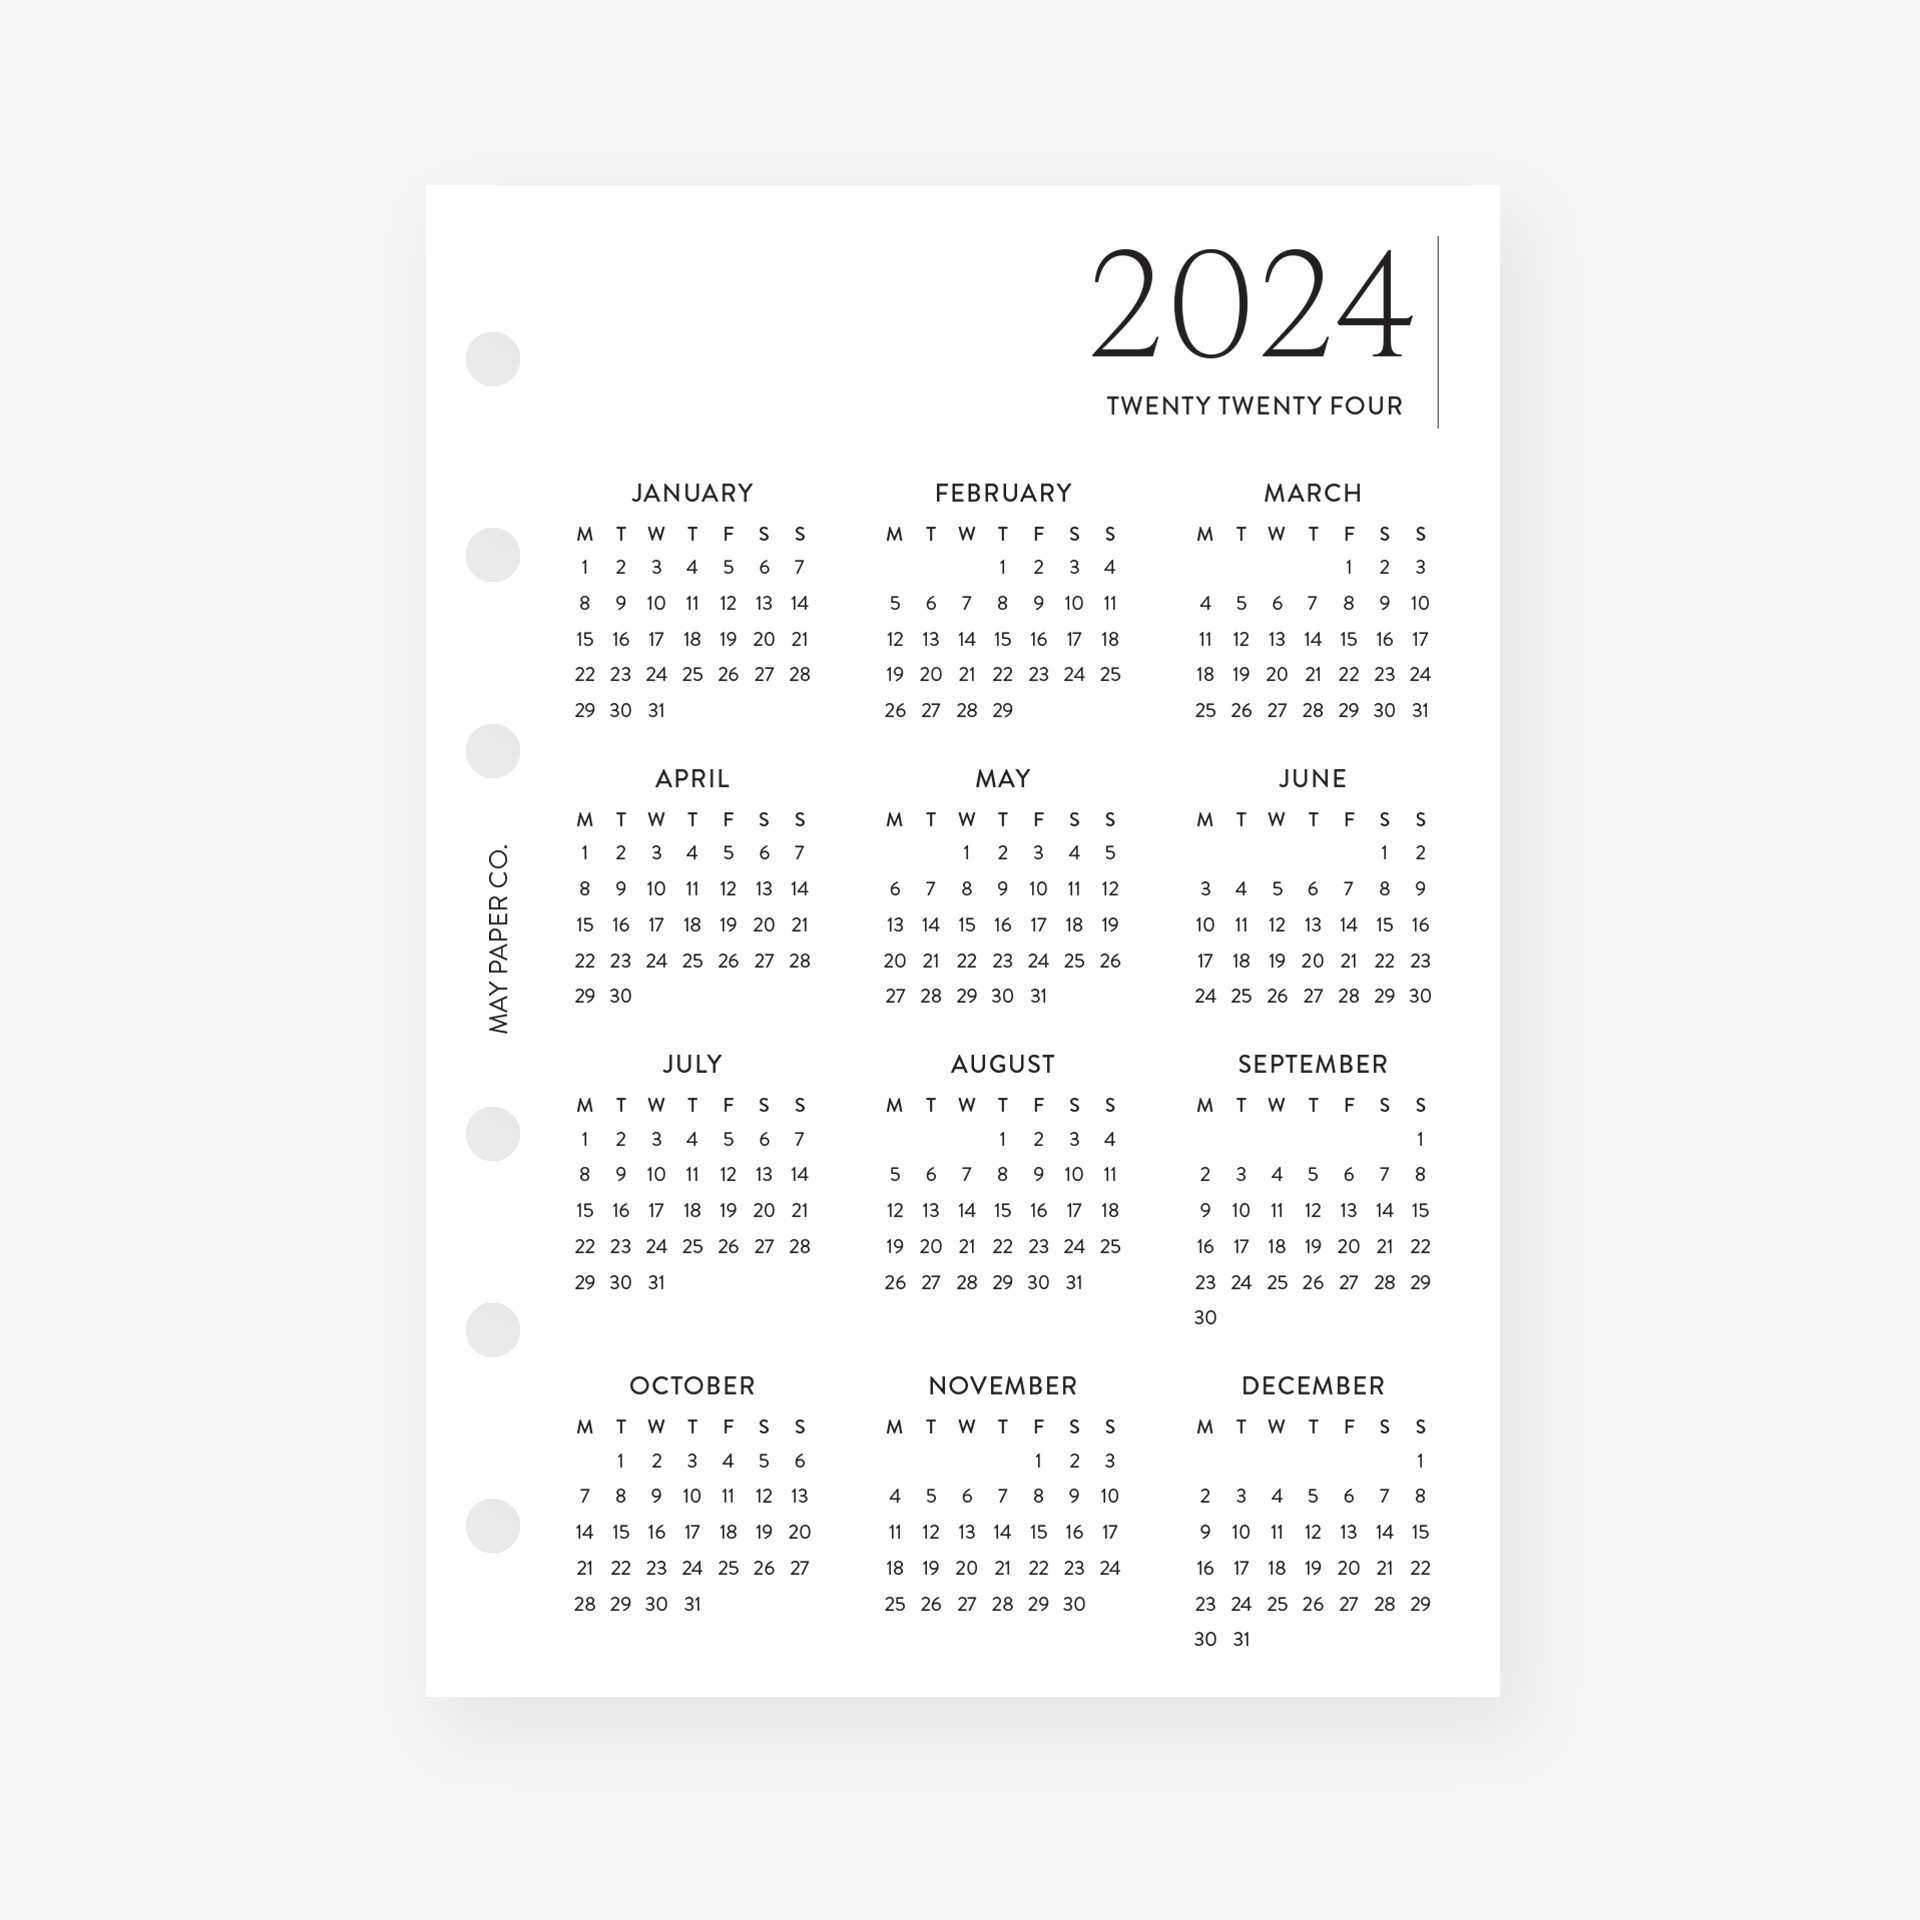 PRINTABLE 2024 Year at a Glance YO1P Overview